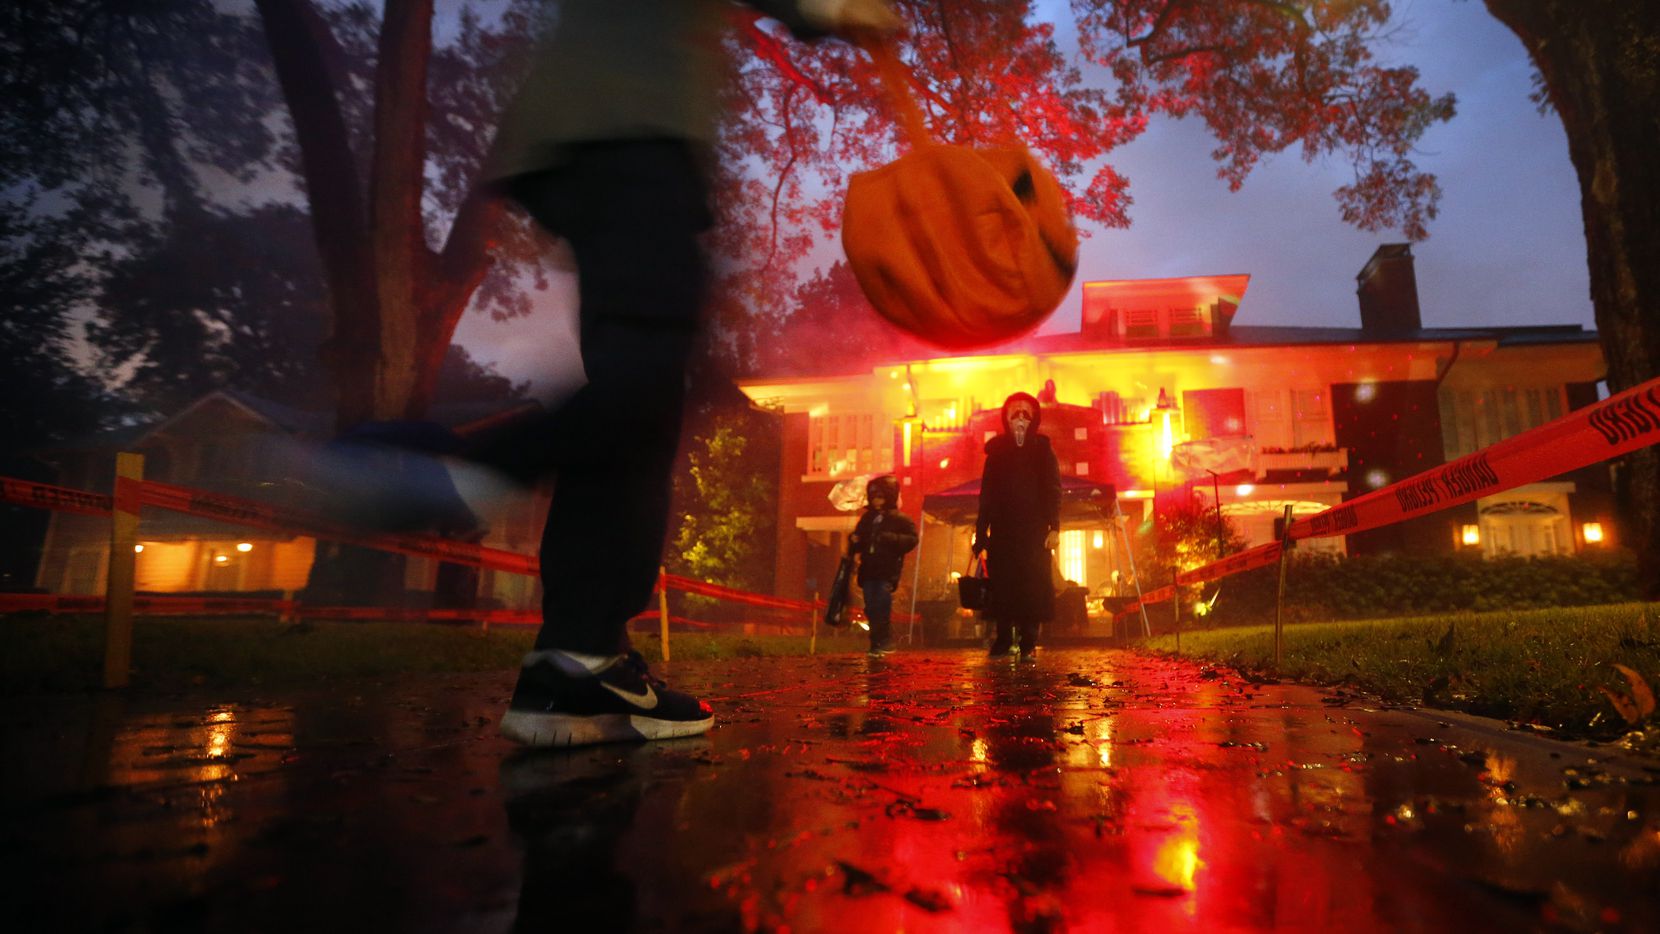 Trick-or-treaters skipped over rain puddles in the historic Swiss Avenue neighborhood of...